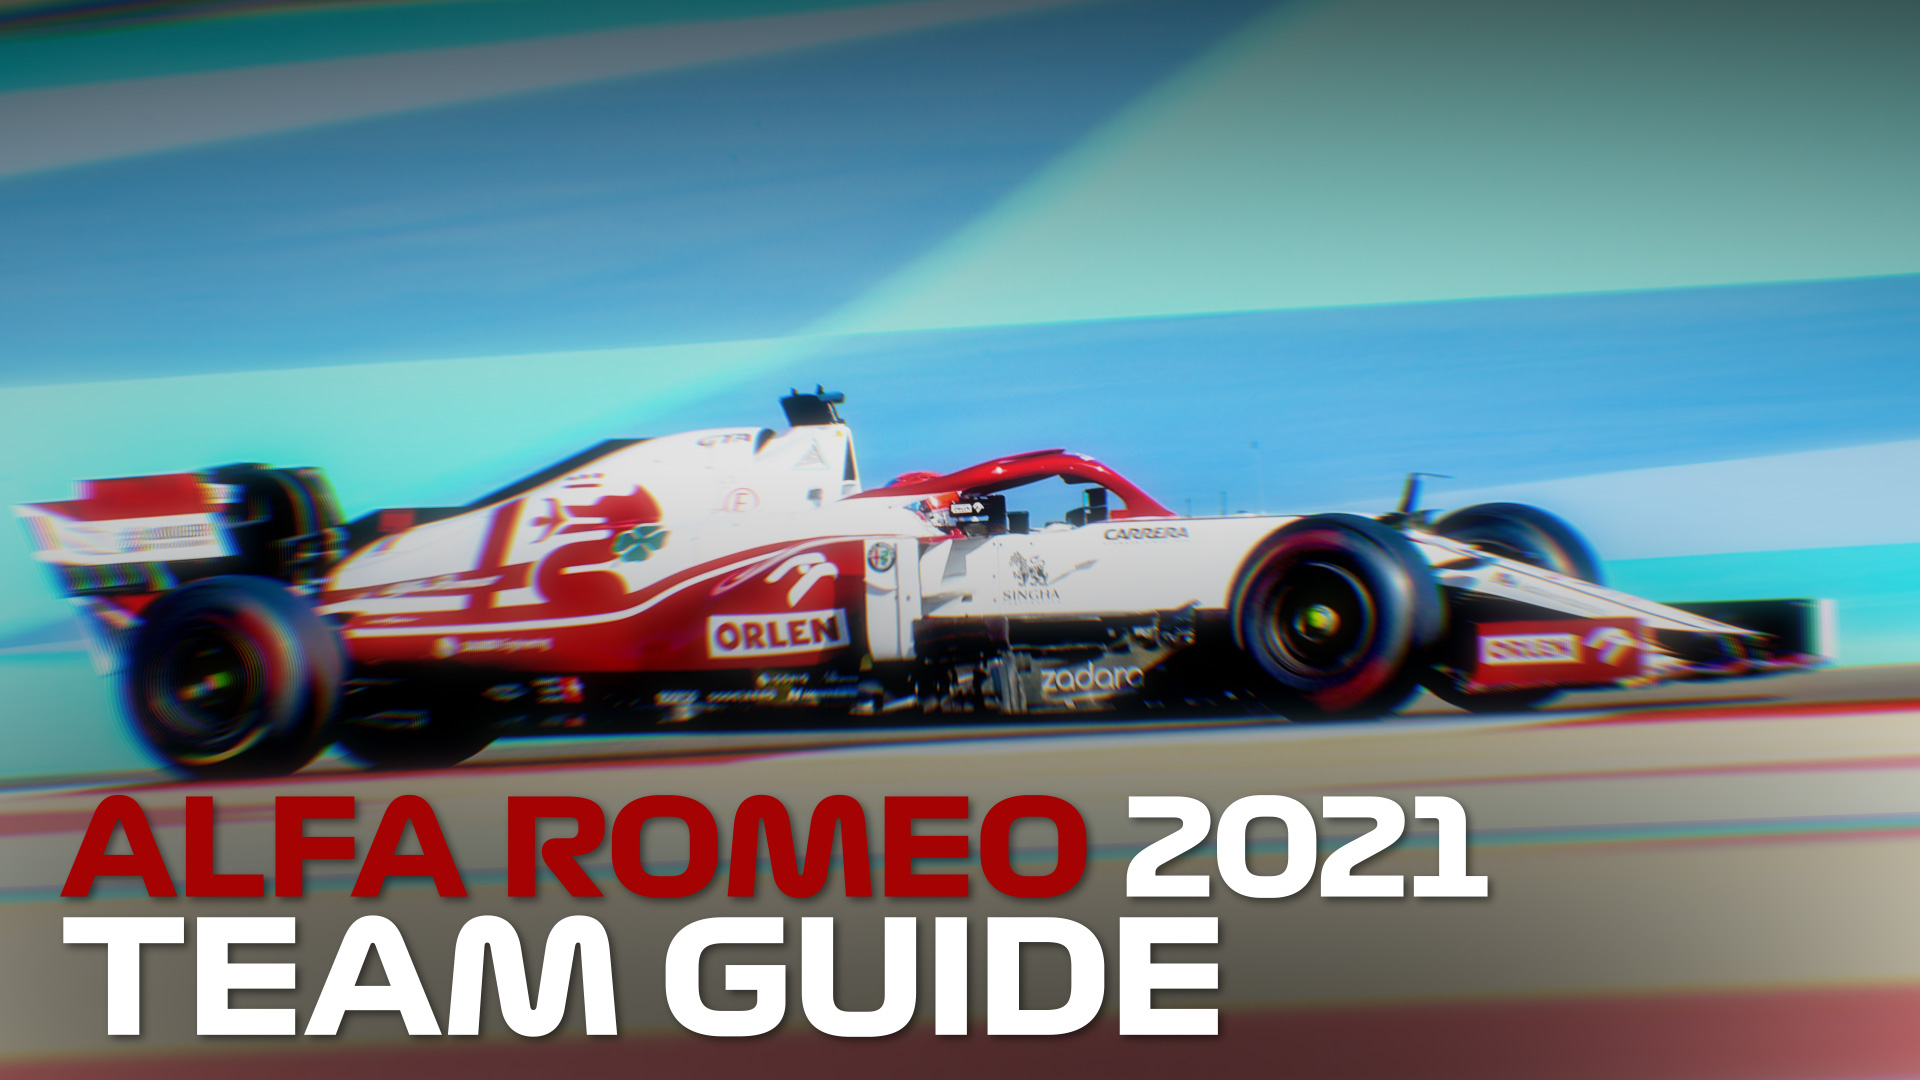 SEASON PREVIEW: The hopes and fears for every Alfa Romeo fan. Formula 1®